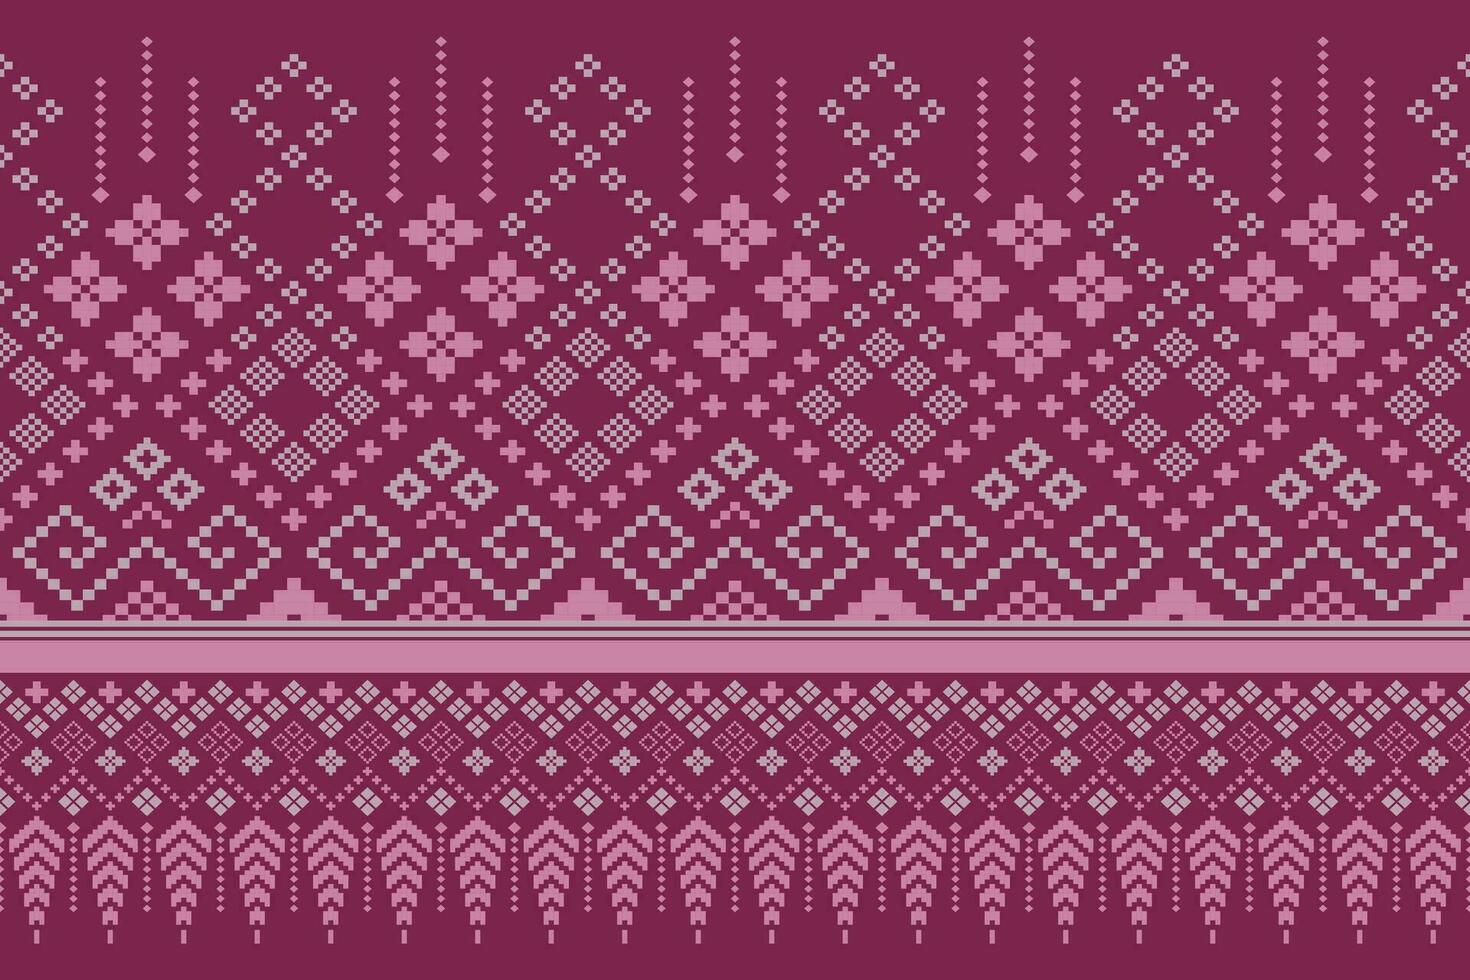 Pink Cross stitch colorful geometric traditional ethnic pattern Ikat seamless pattern border abstract design for fabric print cloth dress carpet curtains and sarong Aztec African Indian Indonesian vector